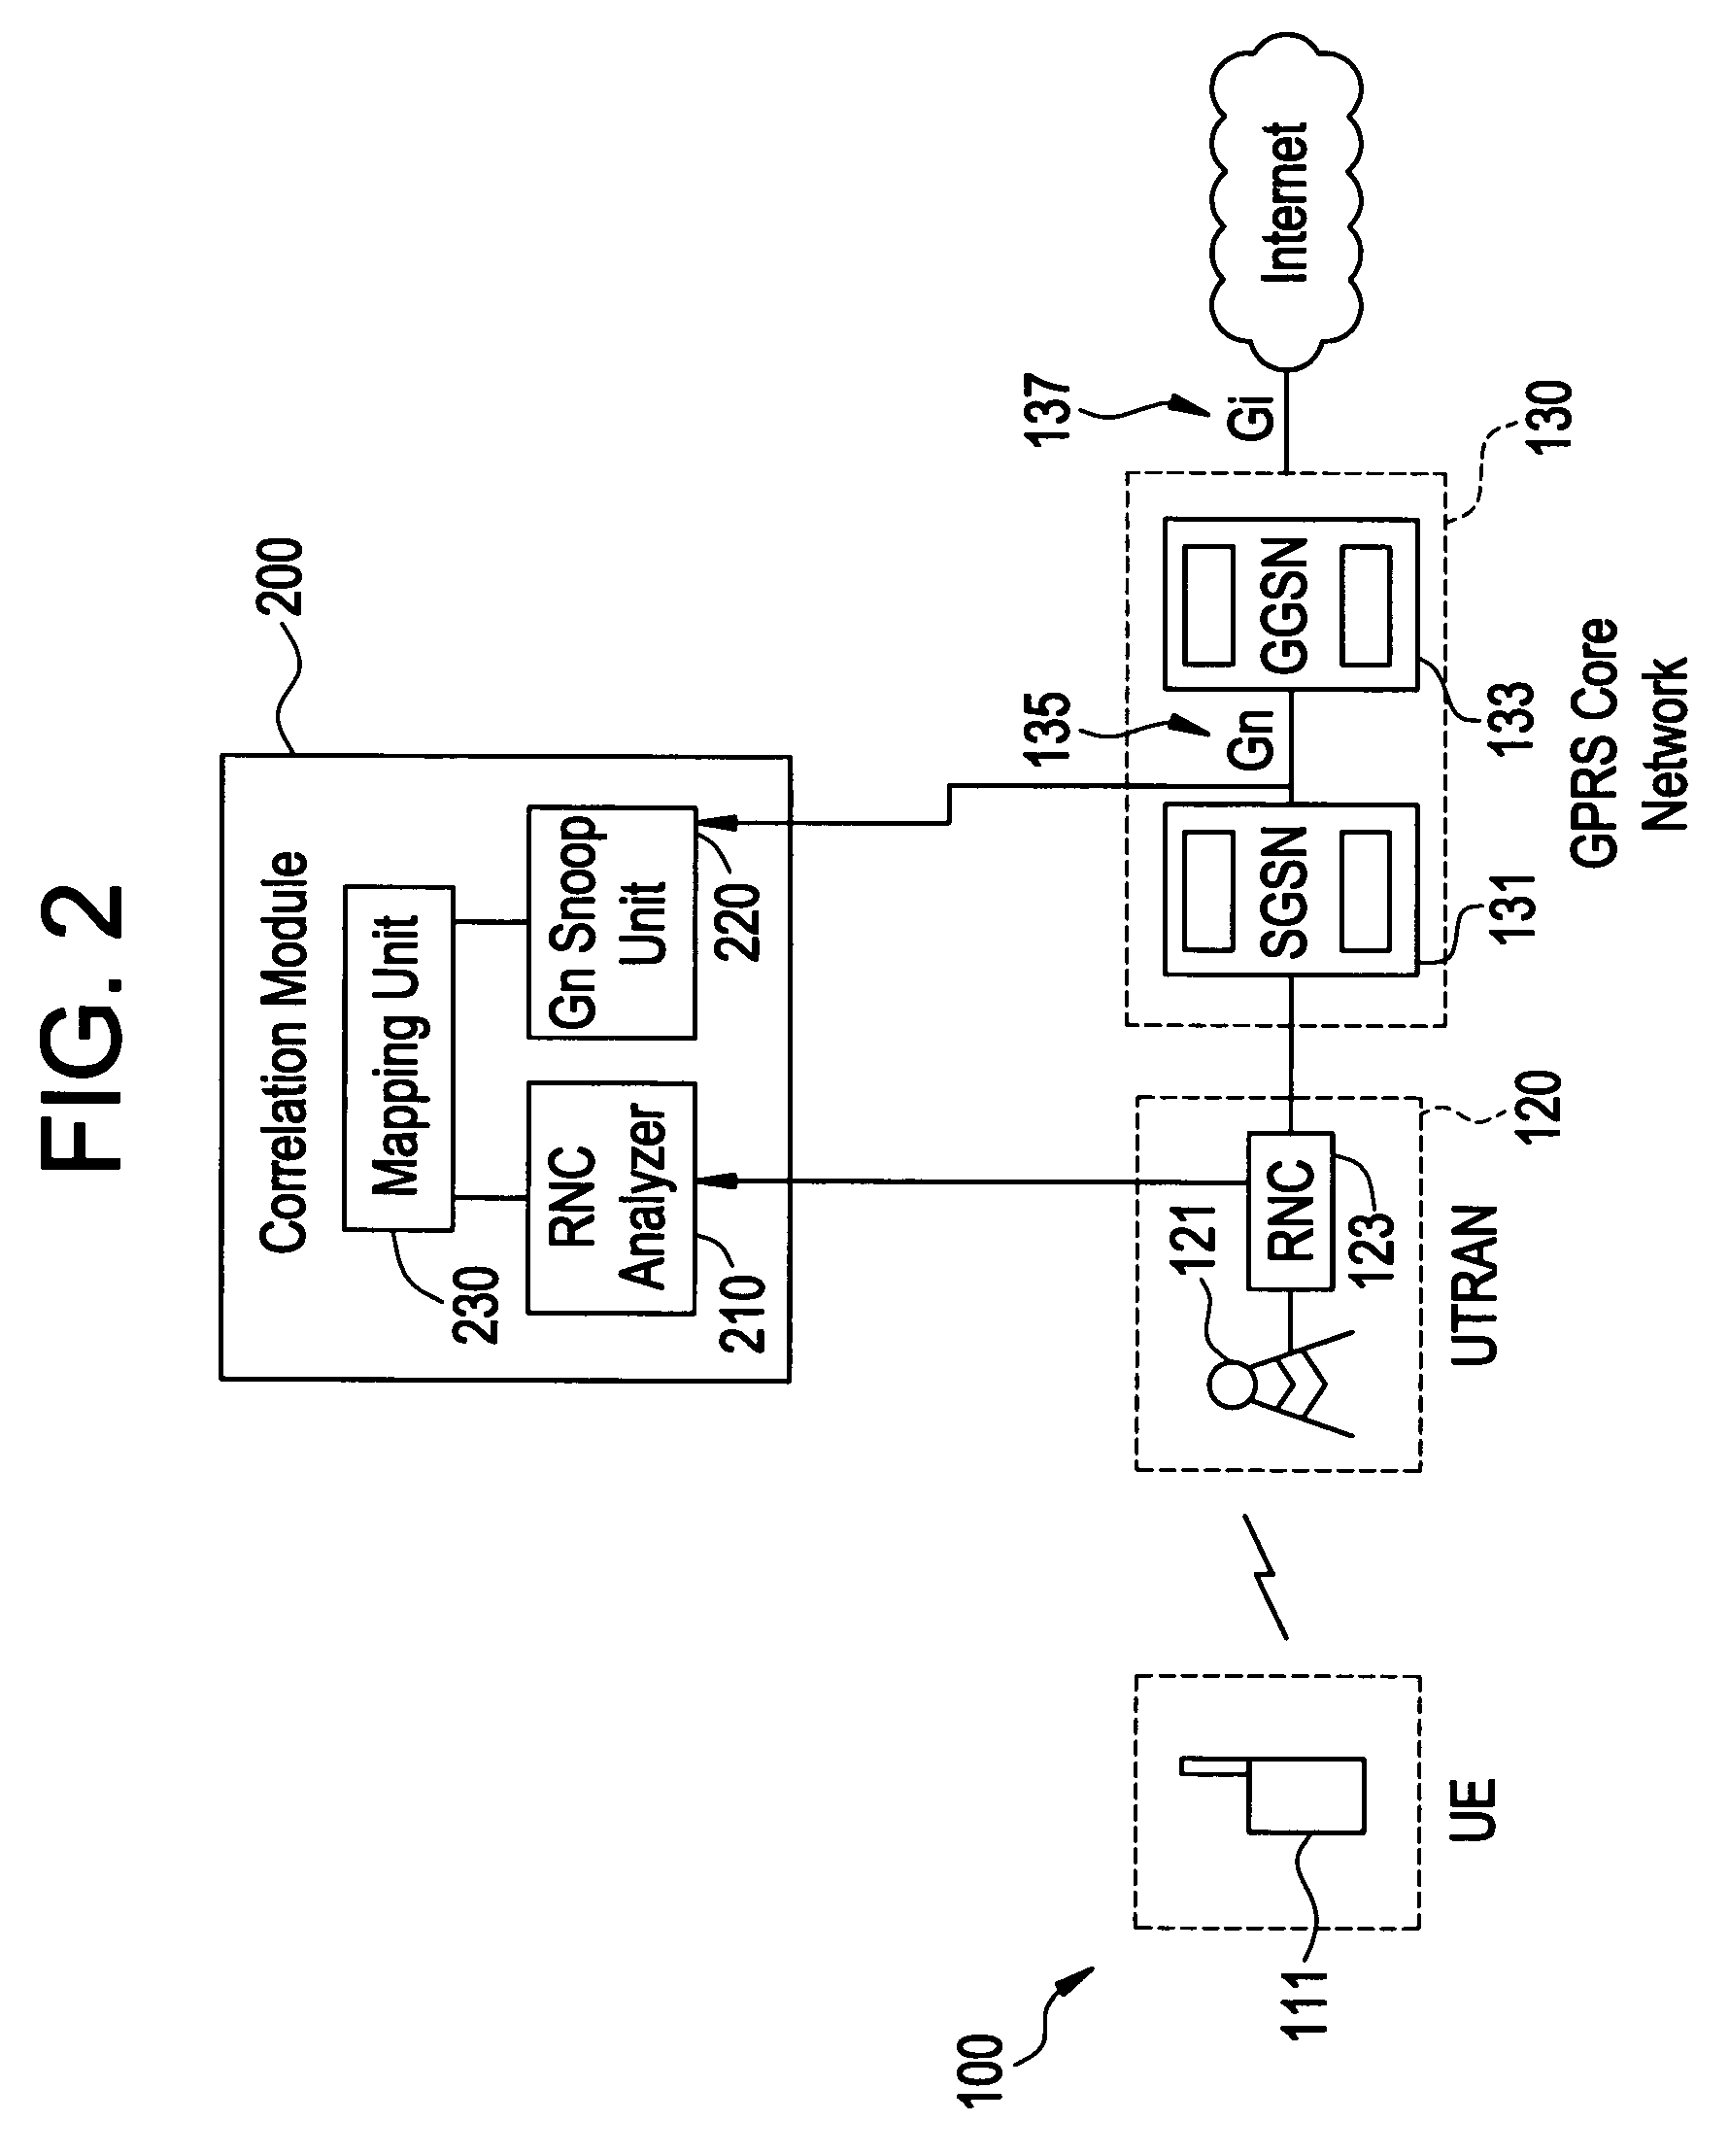 Method and system for correlating IP layer traffic and wirless layer elements in a UMTS/GSM network